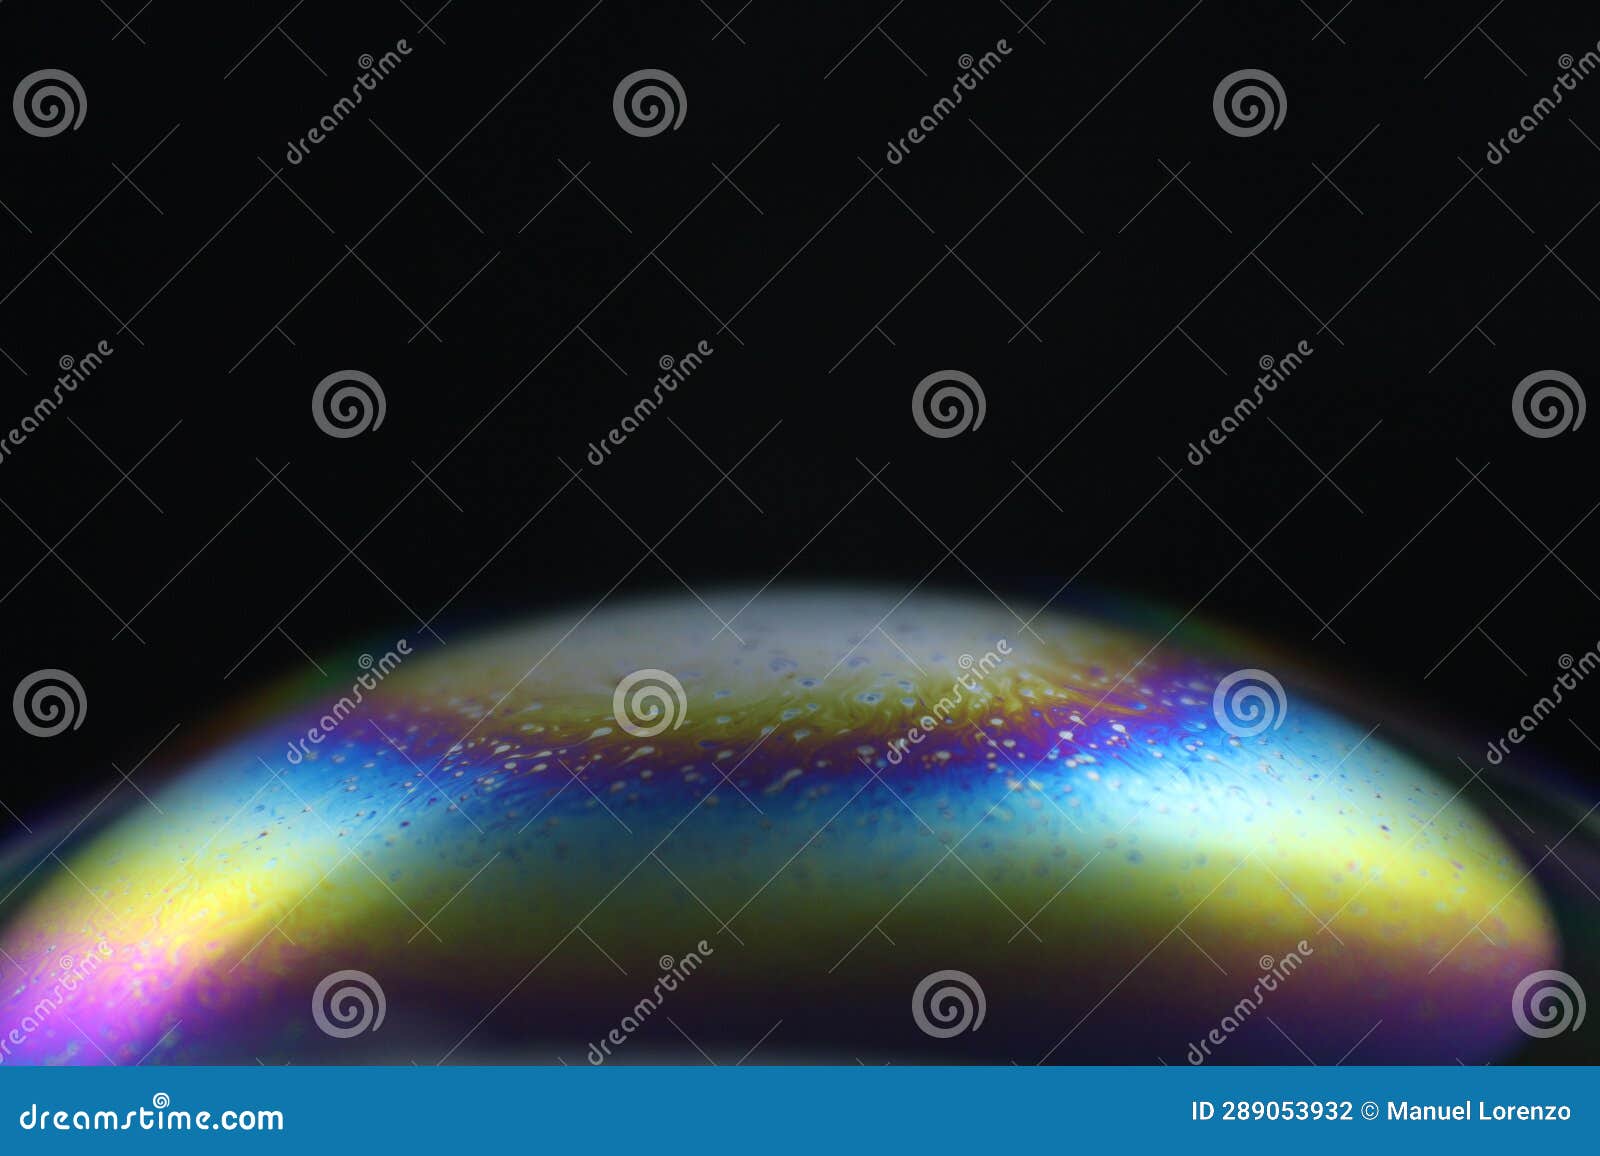 planets colors effects space sphere abstract stellar soap funds